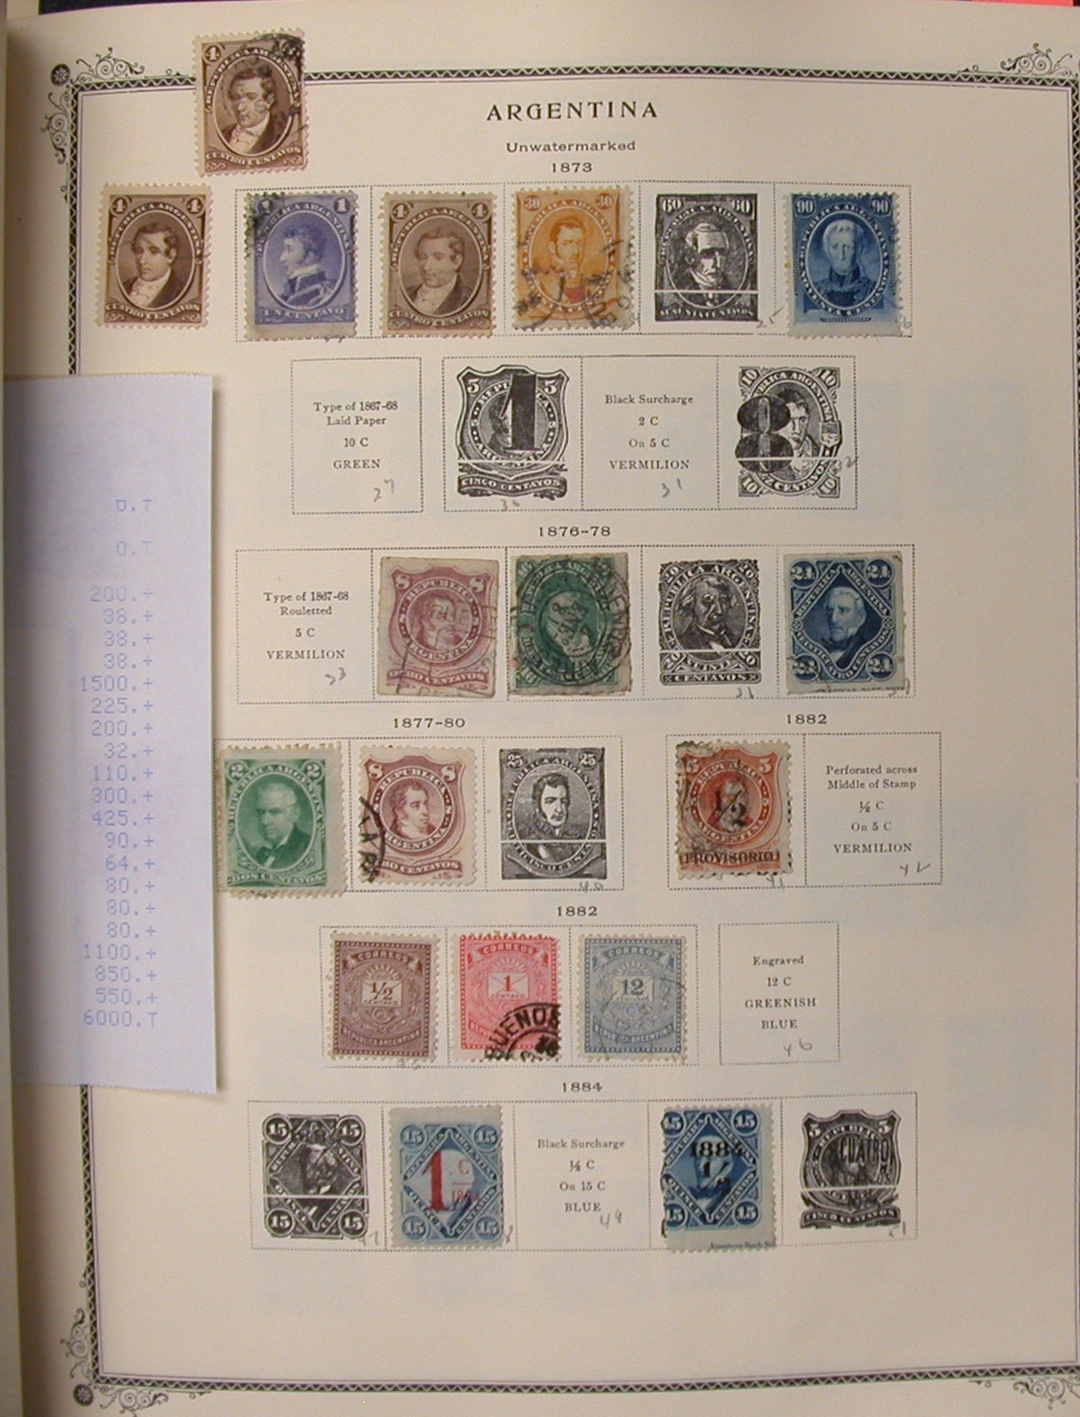 Stamp Collecting Folder, Album Collector Stamps